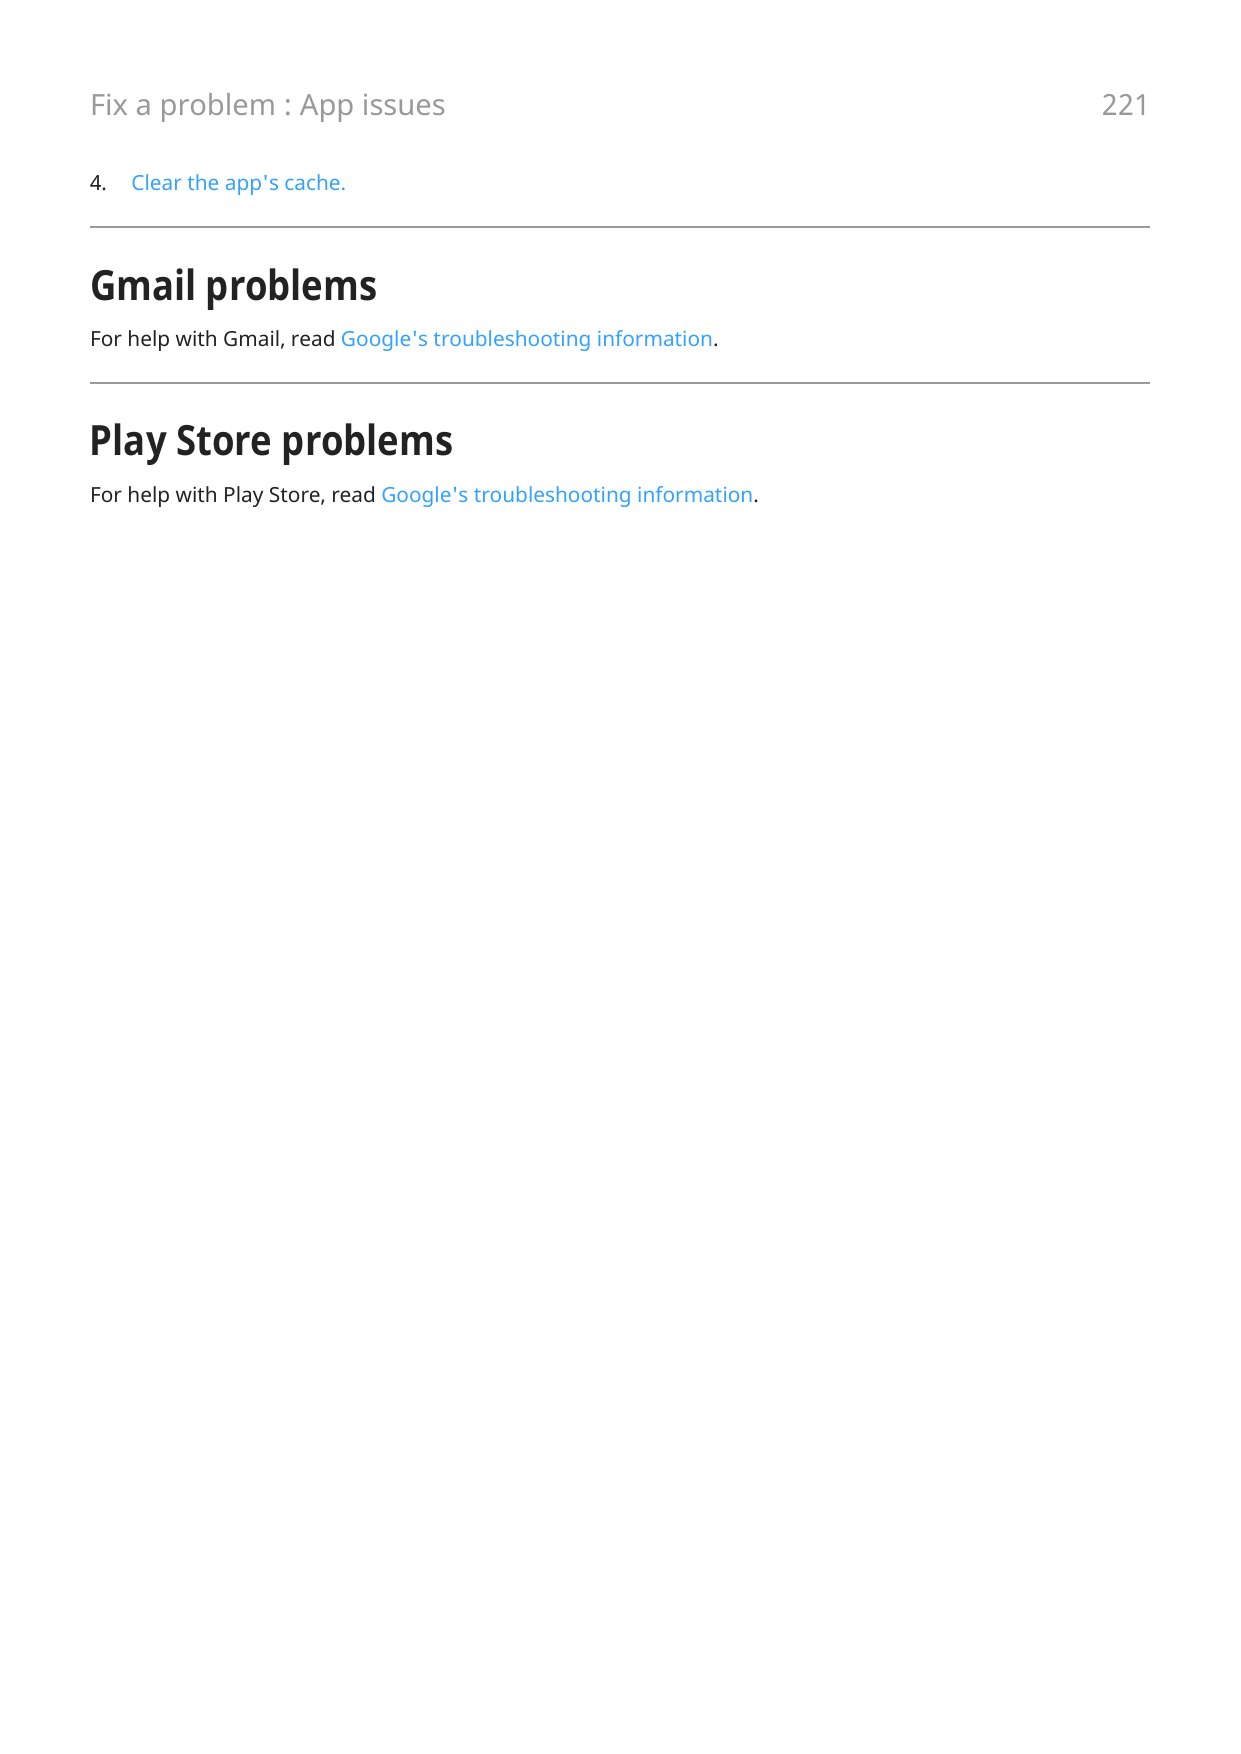 Fix a problem : App issues4.Clear the app's cache.Gmail problemsFor help with Gmail, read Google's troubleshooting information.P